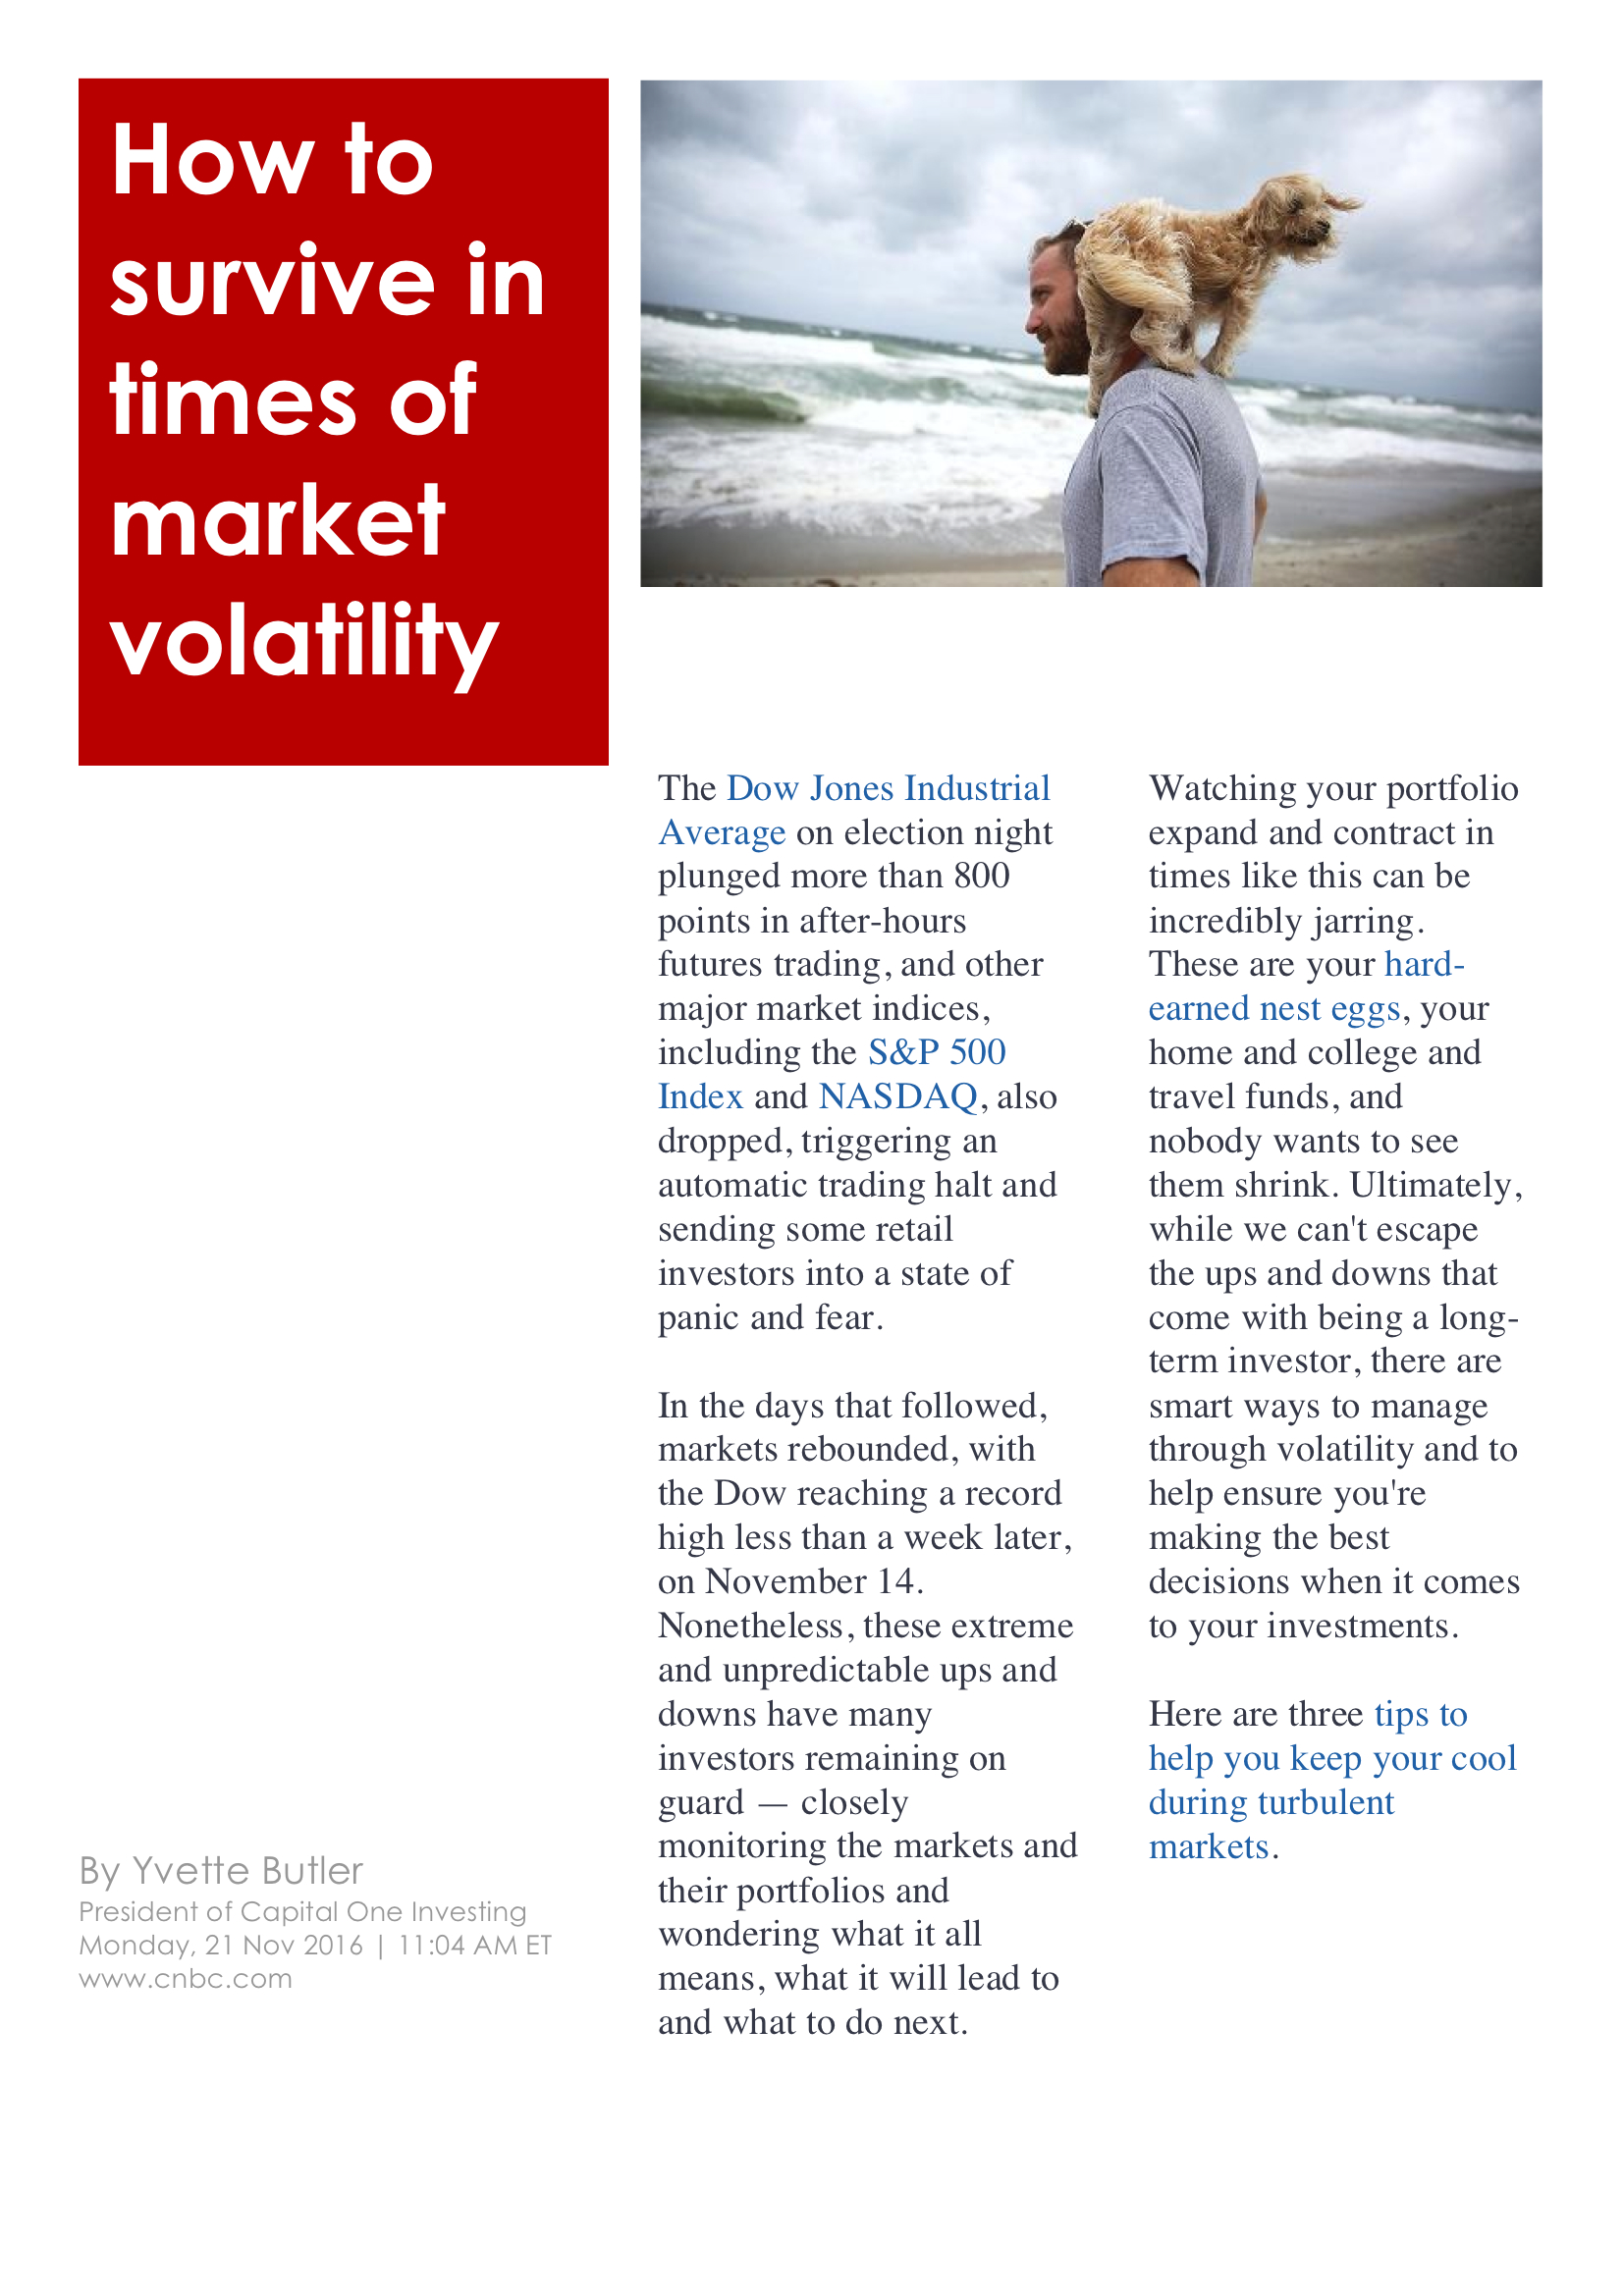 How to Survive in Times of Market Volatility